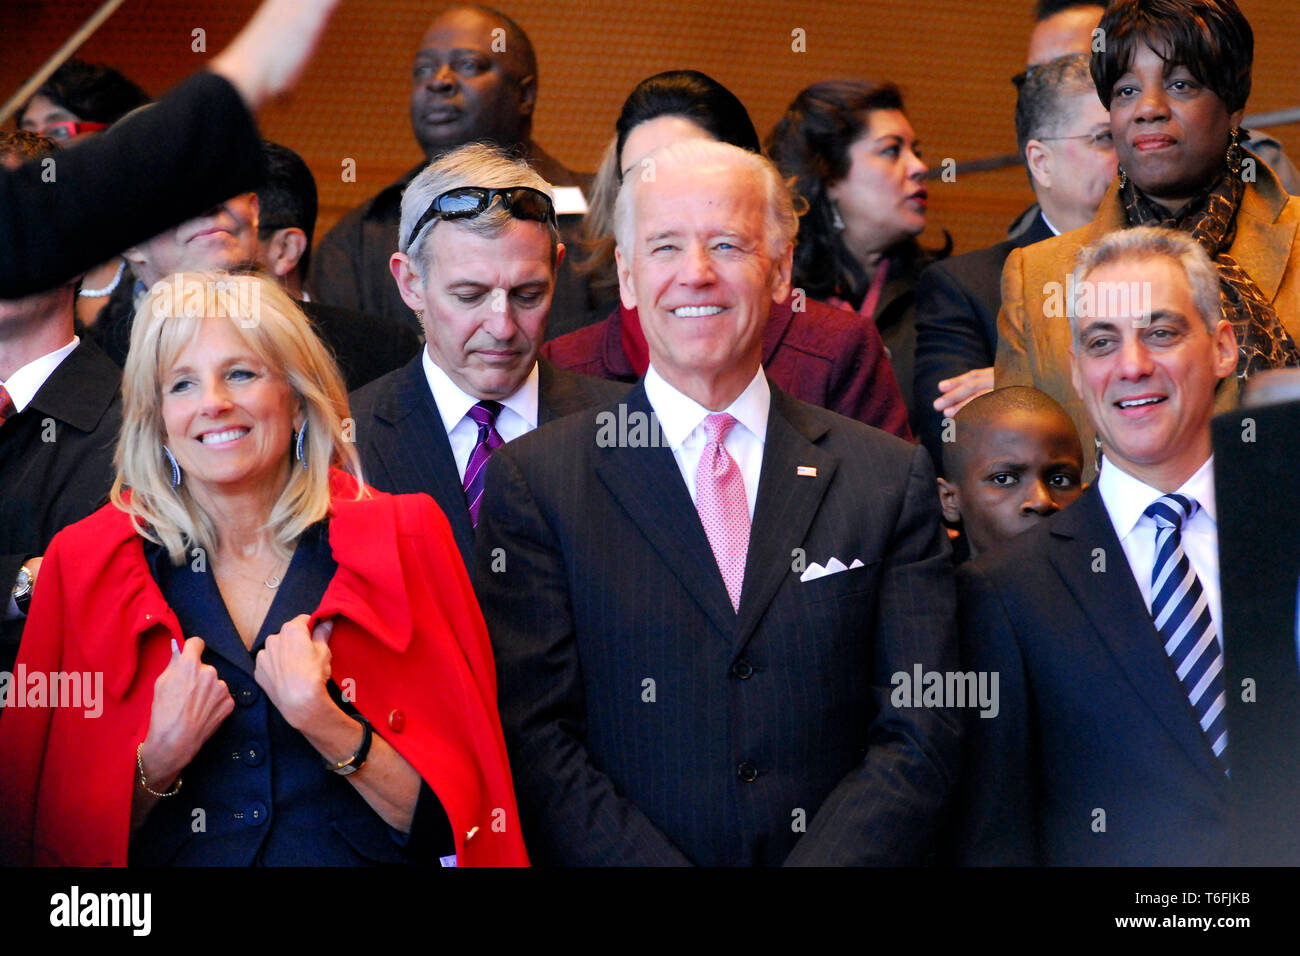 CHICAGO,IL-MAY 16: Vice President Joe Biden with his wife Jill Biden and Rahm Emanuel at Rahm Emanuel's Inauguration at Jay Pritzker Pavilion in Millennium Park in Chicago, IL on May 16, 2011. (Photo By Daniel Locke/MediaPunch Inc) Stock Photo